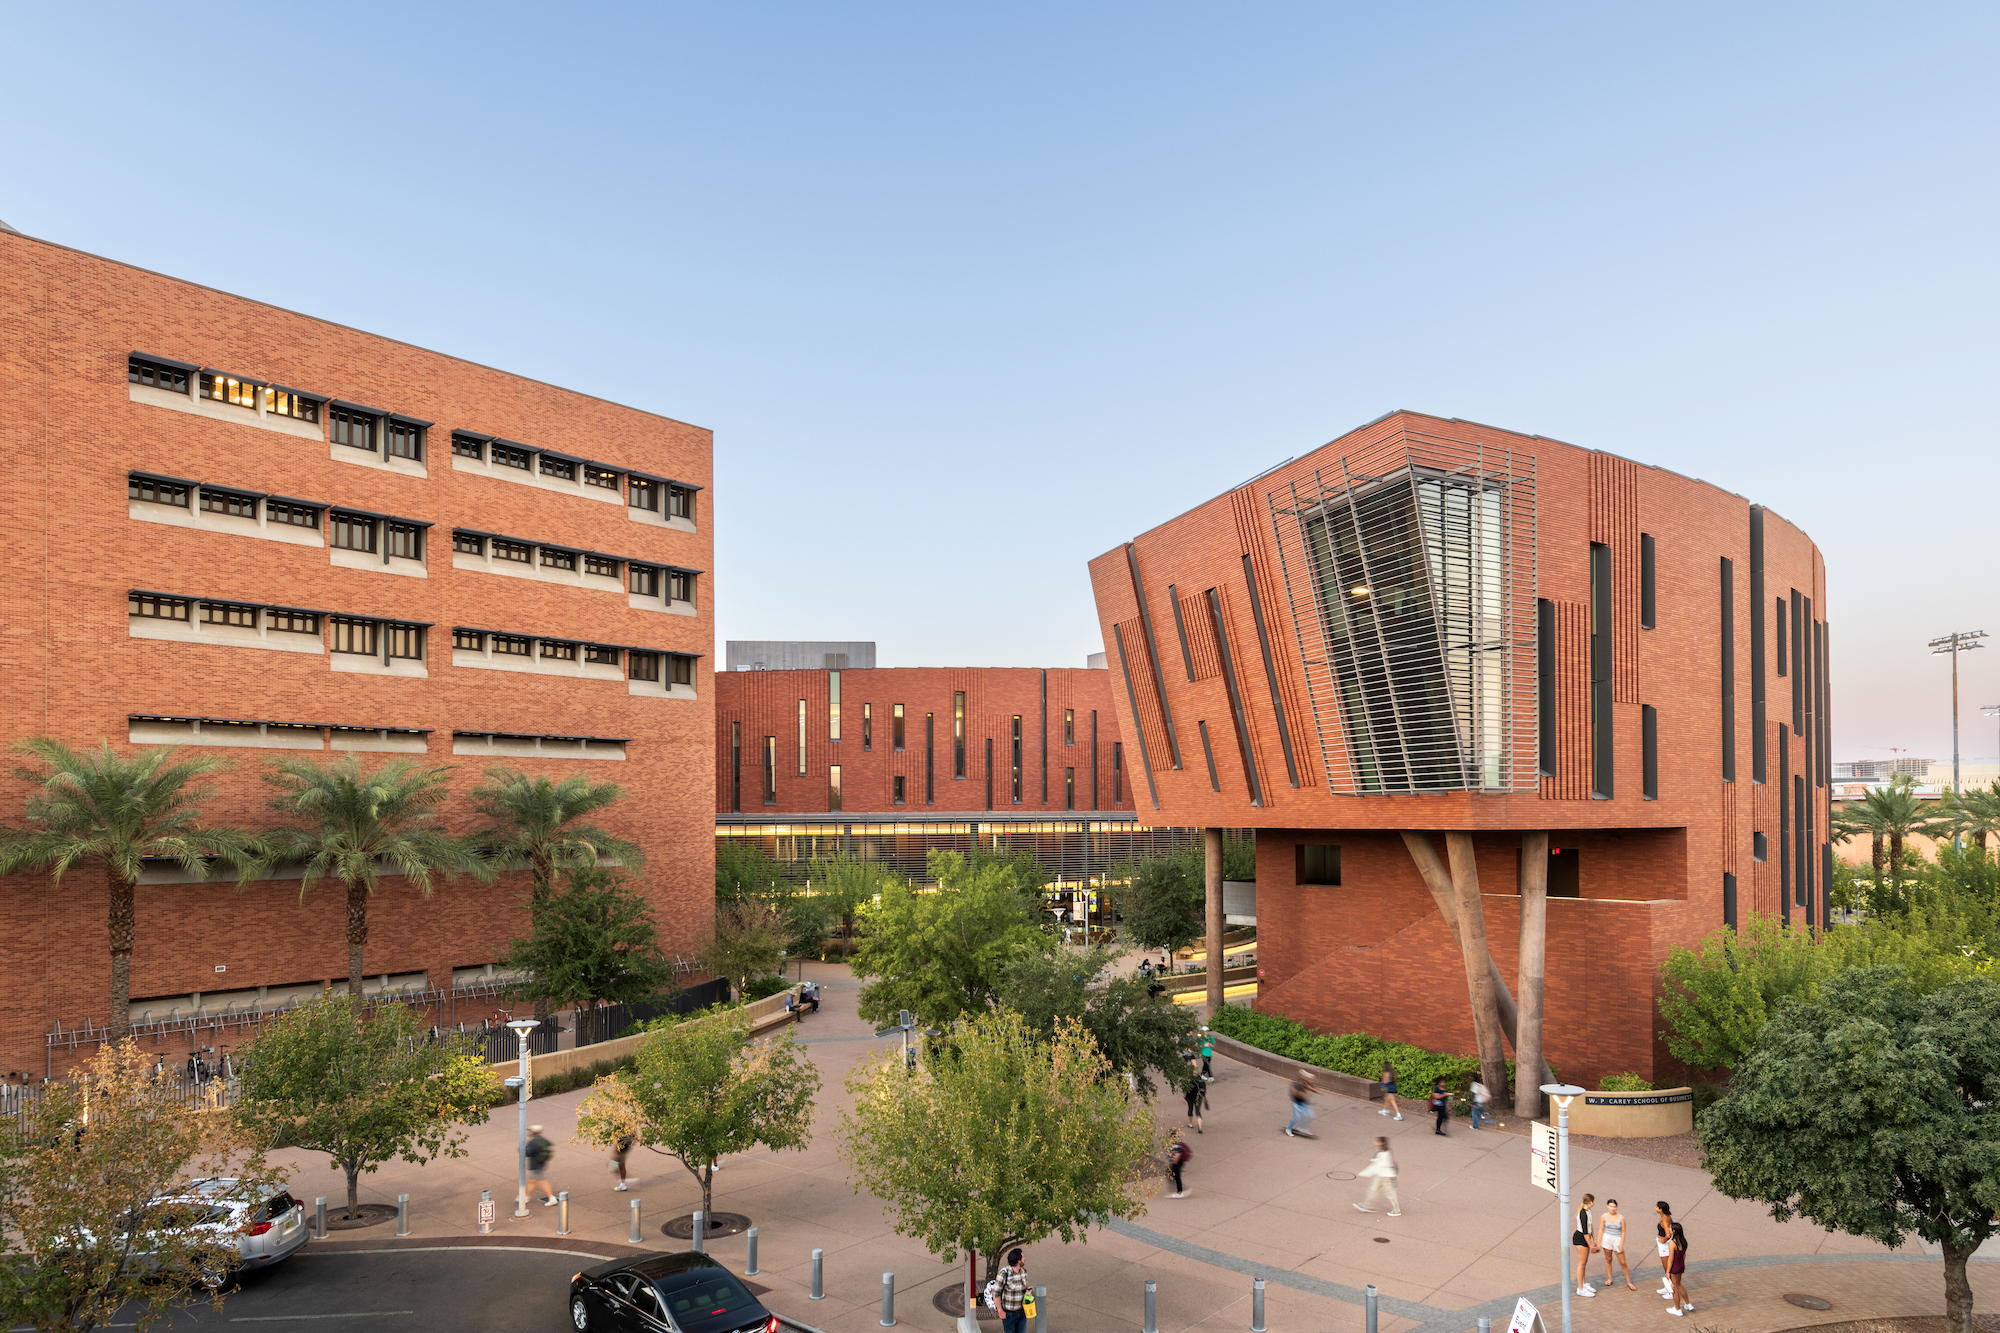 McCord Hall and the BAC building on the Tempe campus